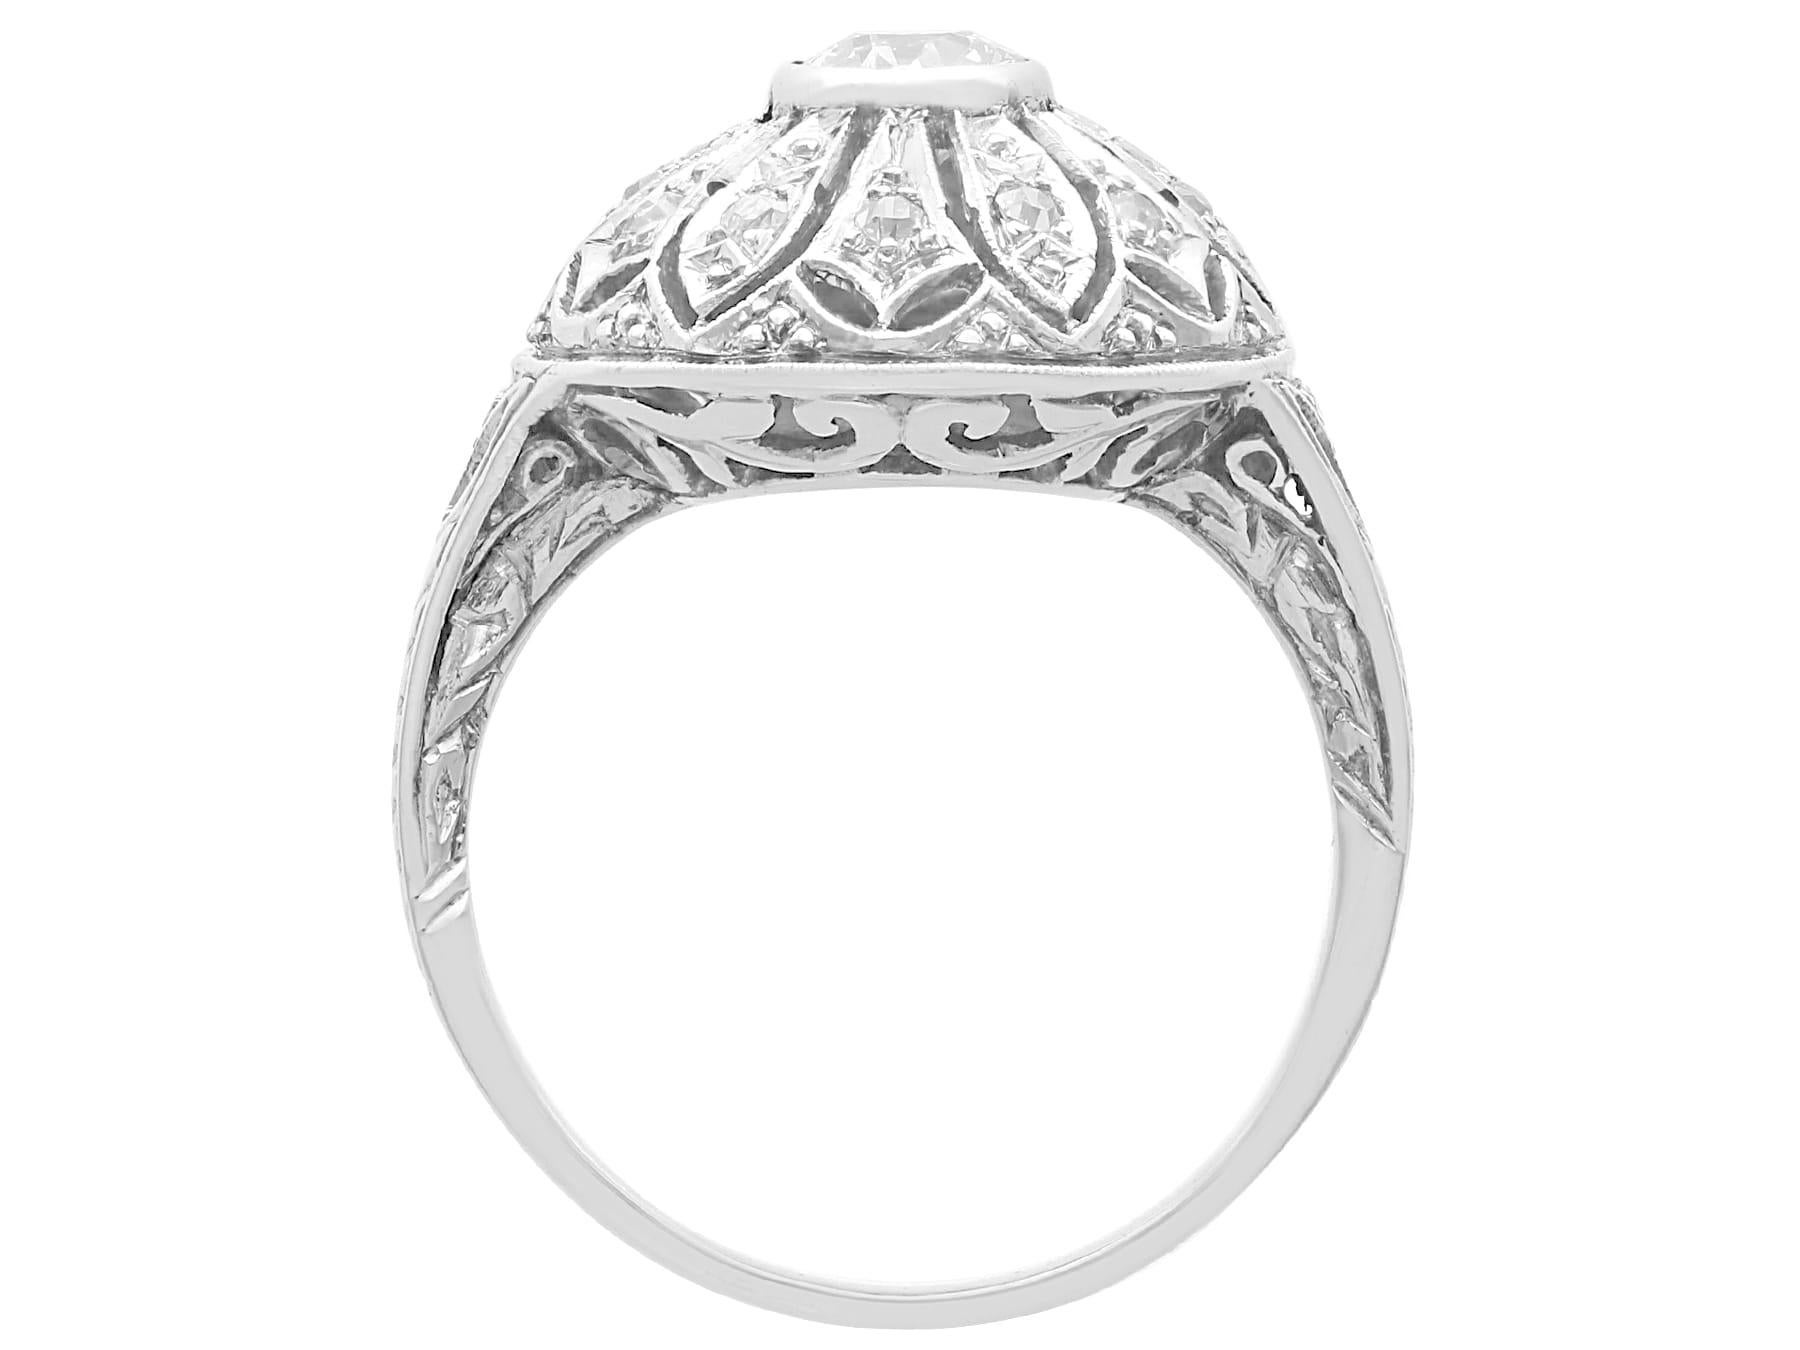 Antique 1920s 0.57 Carat Diamond and 14k White Gold Art Deco Cocktail Ring  For Sale 1